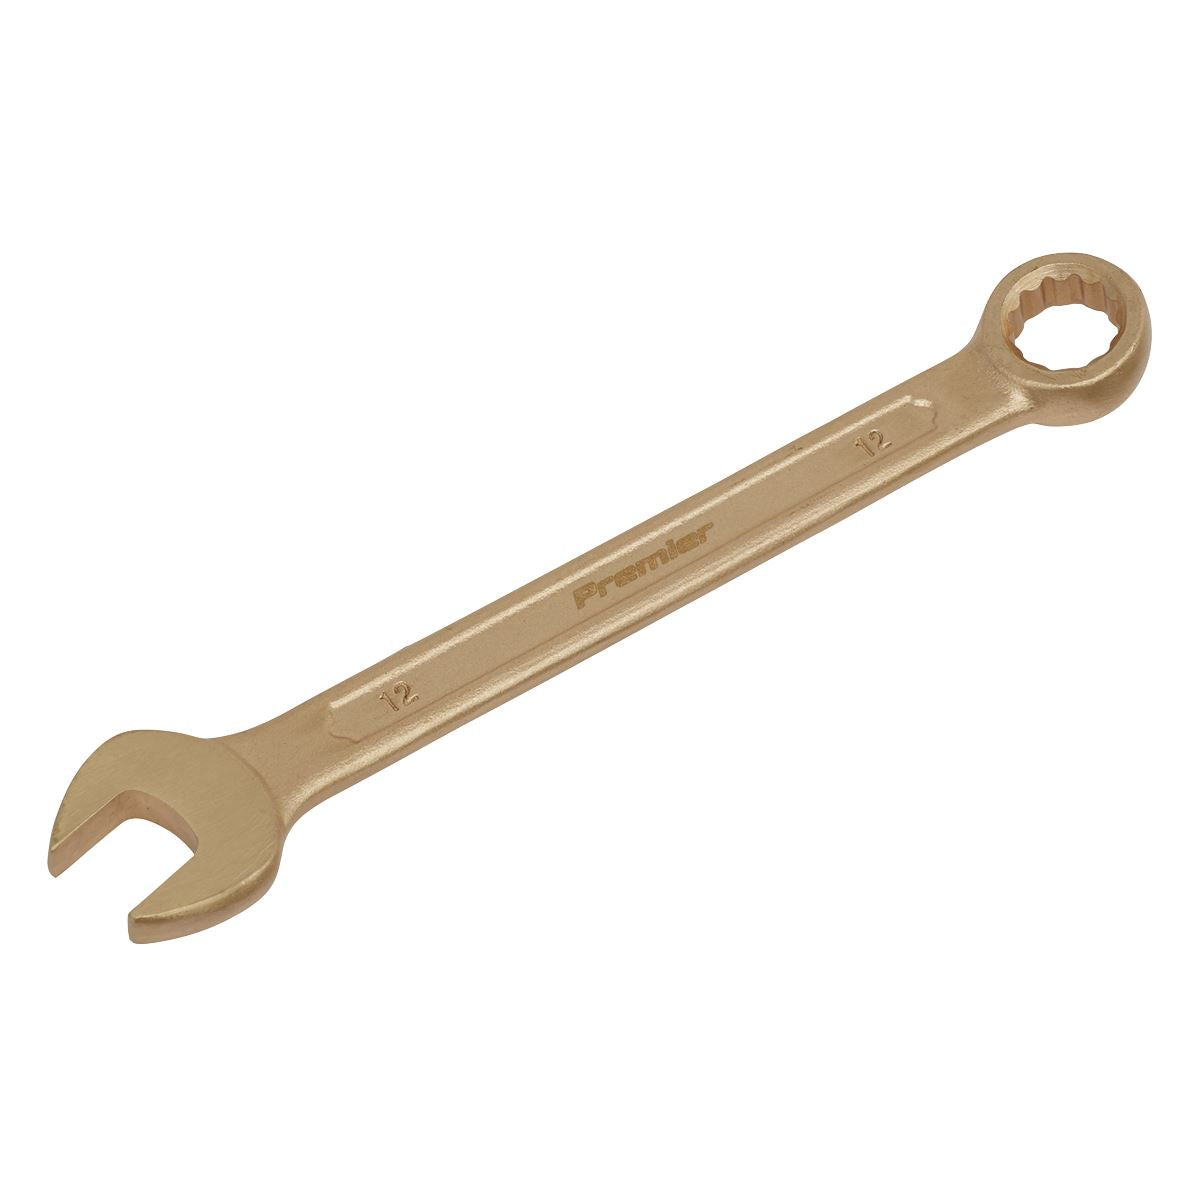 Sealey Premier Combination Spanner 12mm - Non-Sparking